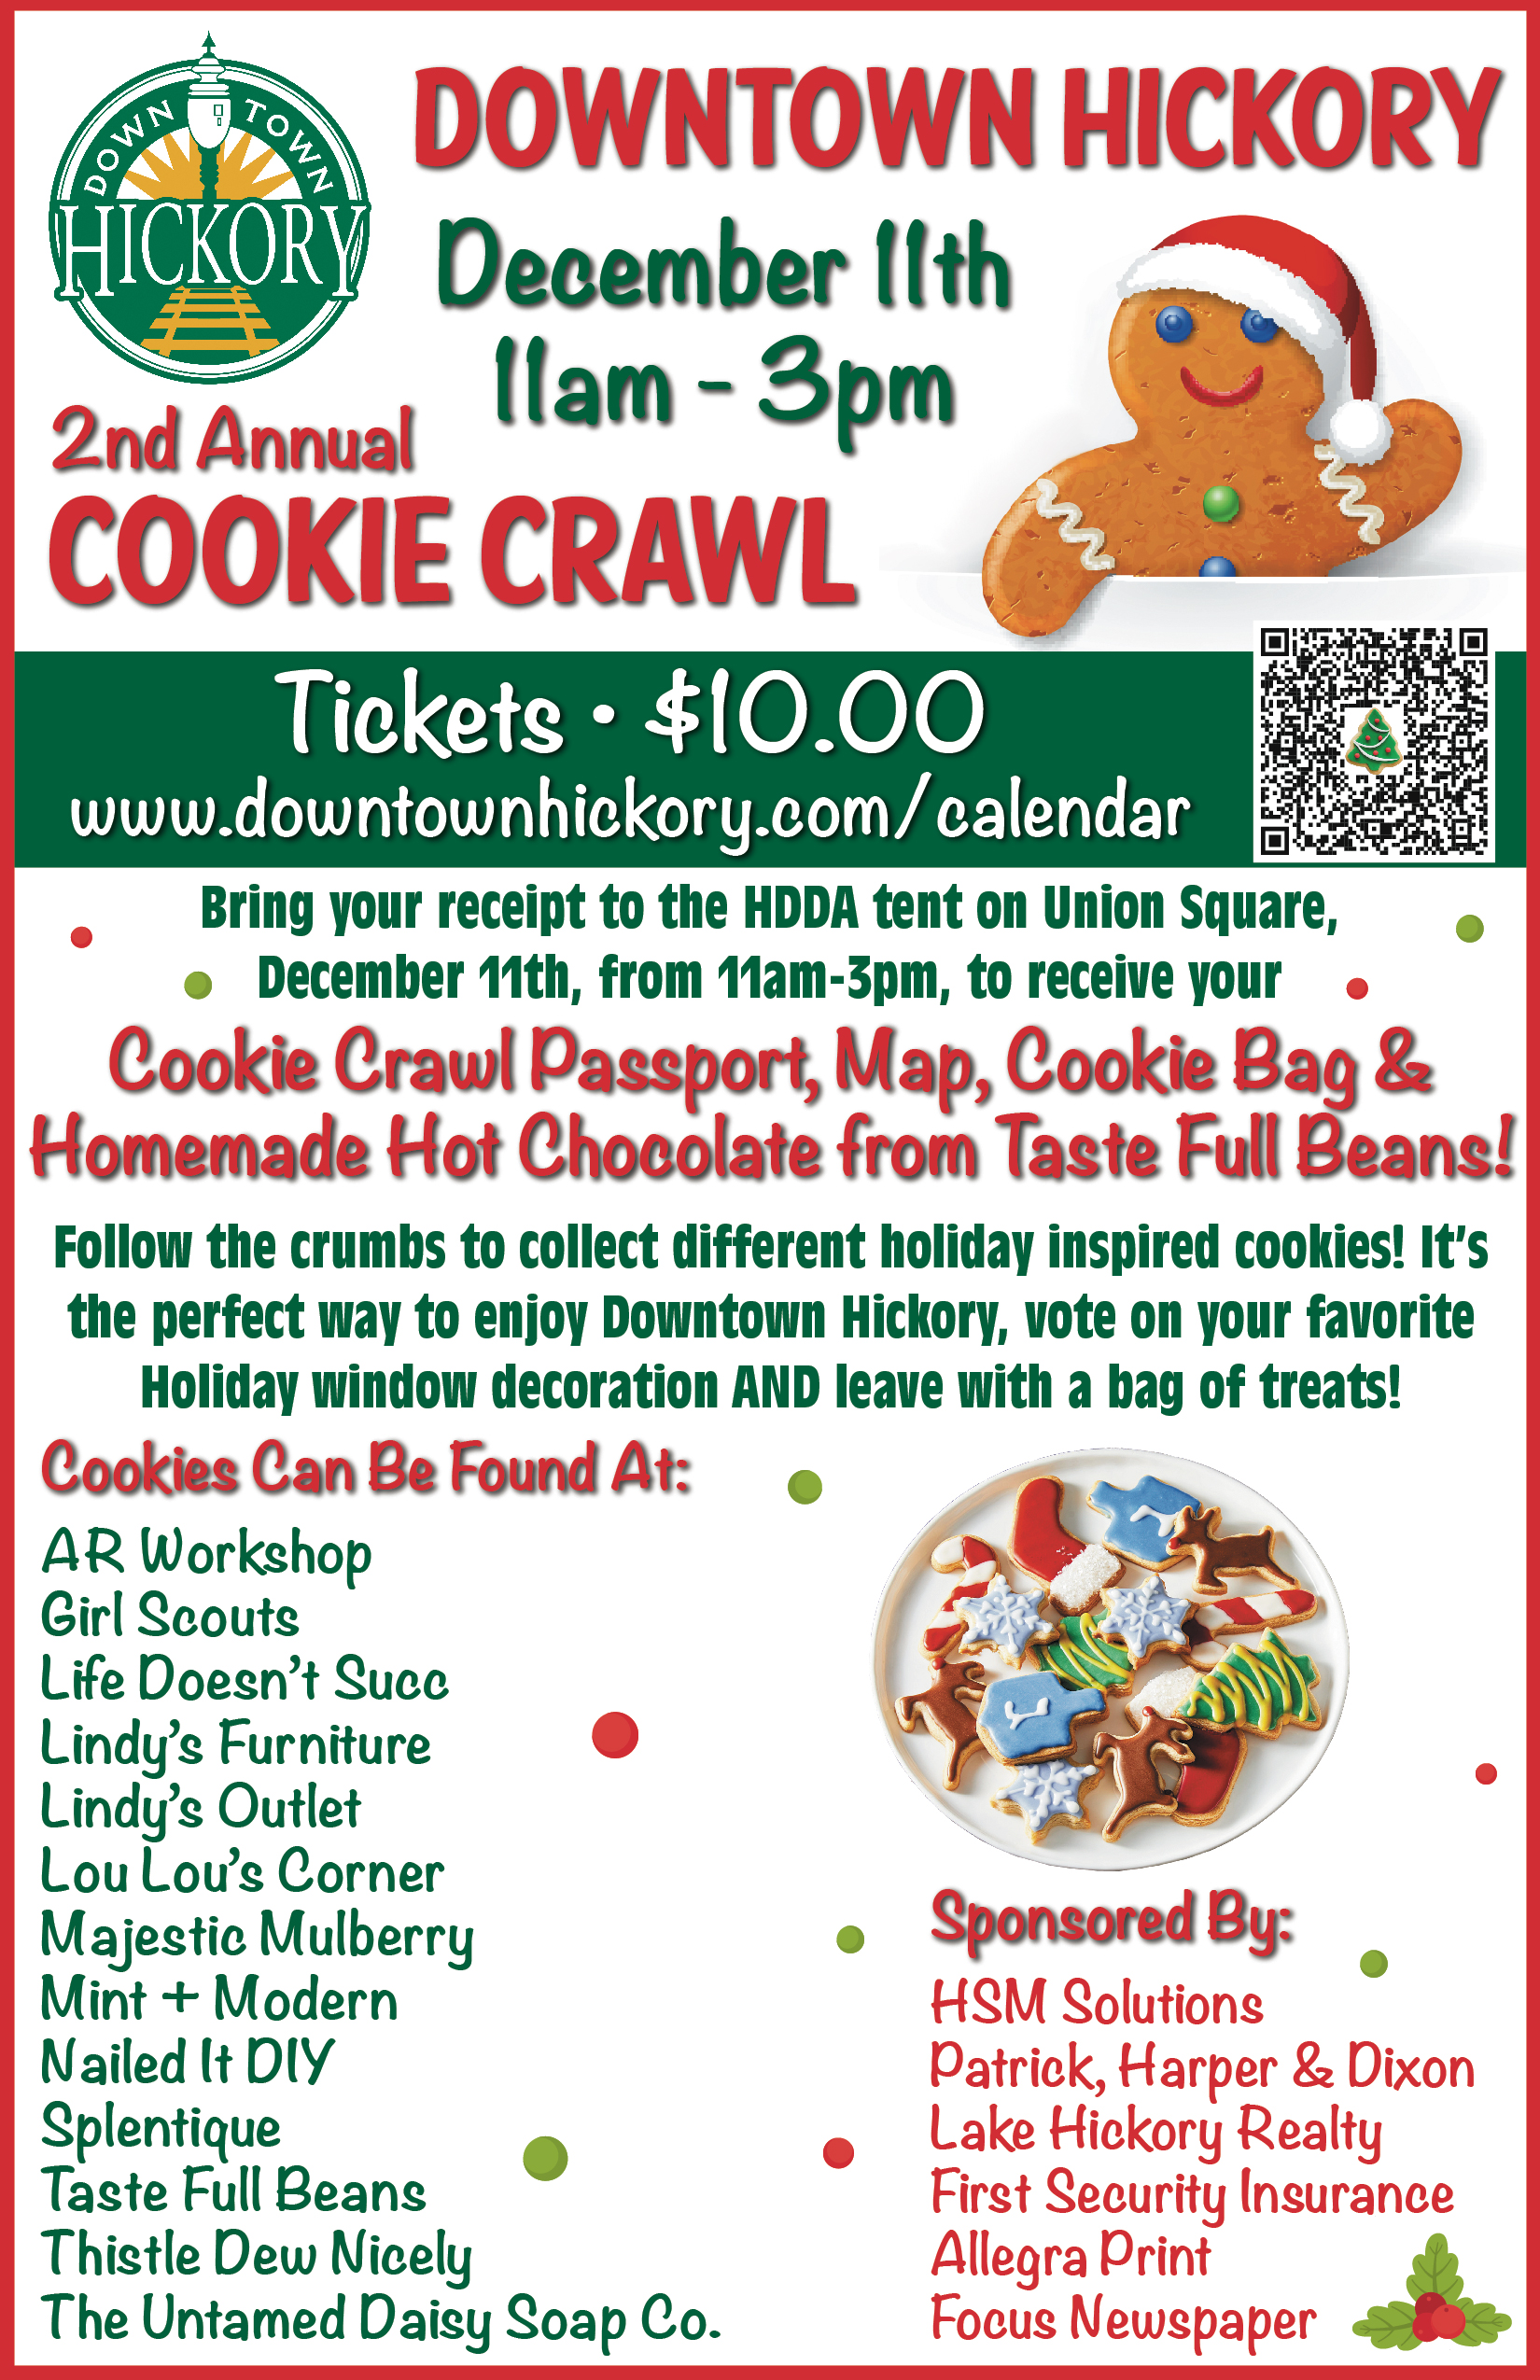 Downtown Hickory 2nd Annual Cookie Crawl